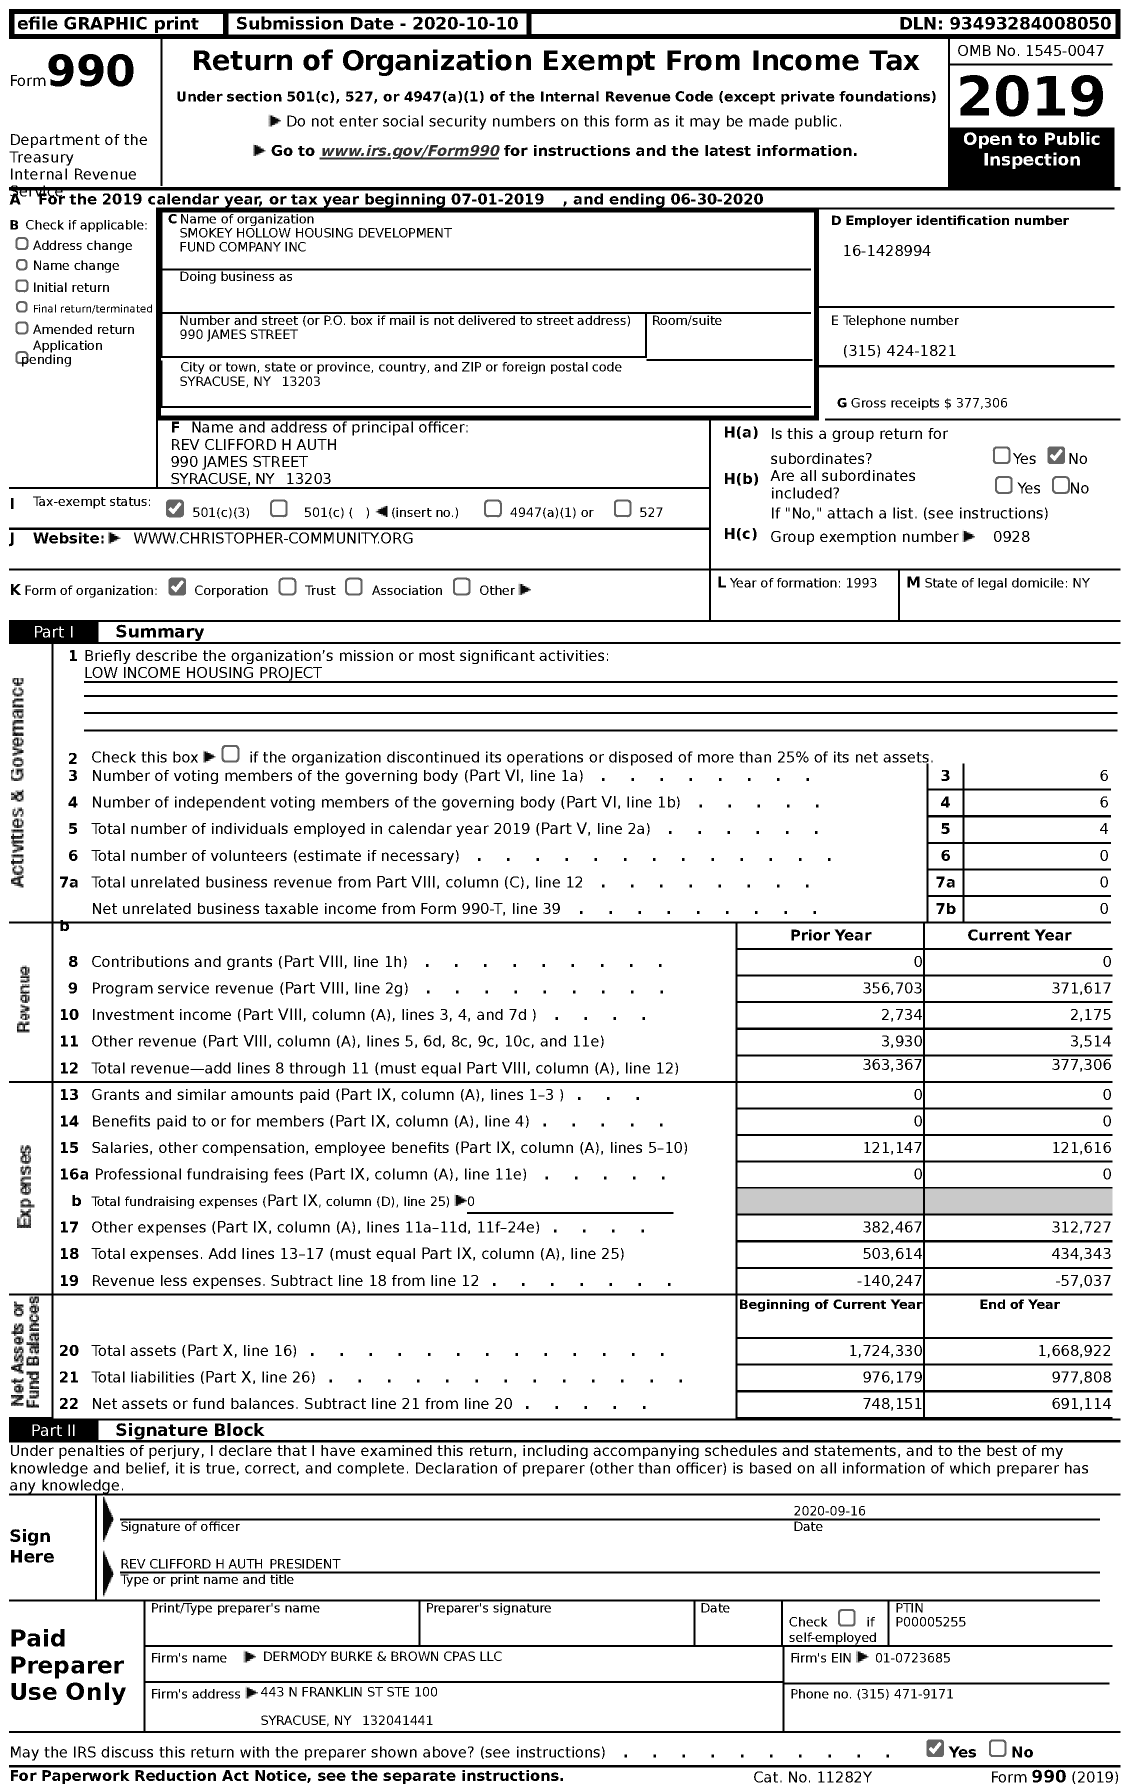 Image of first page of 2019 Form 990 for Smokey Hollow Housing Development Fund Company